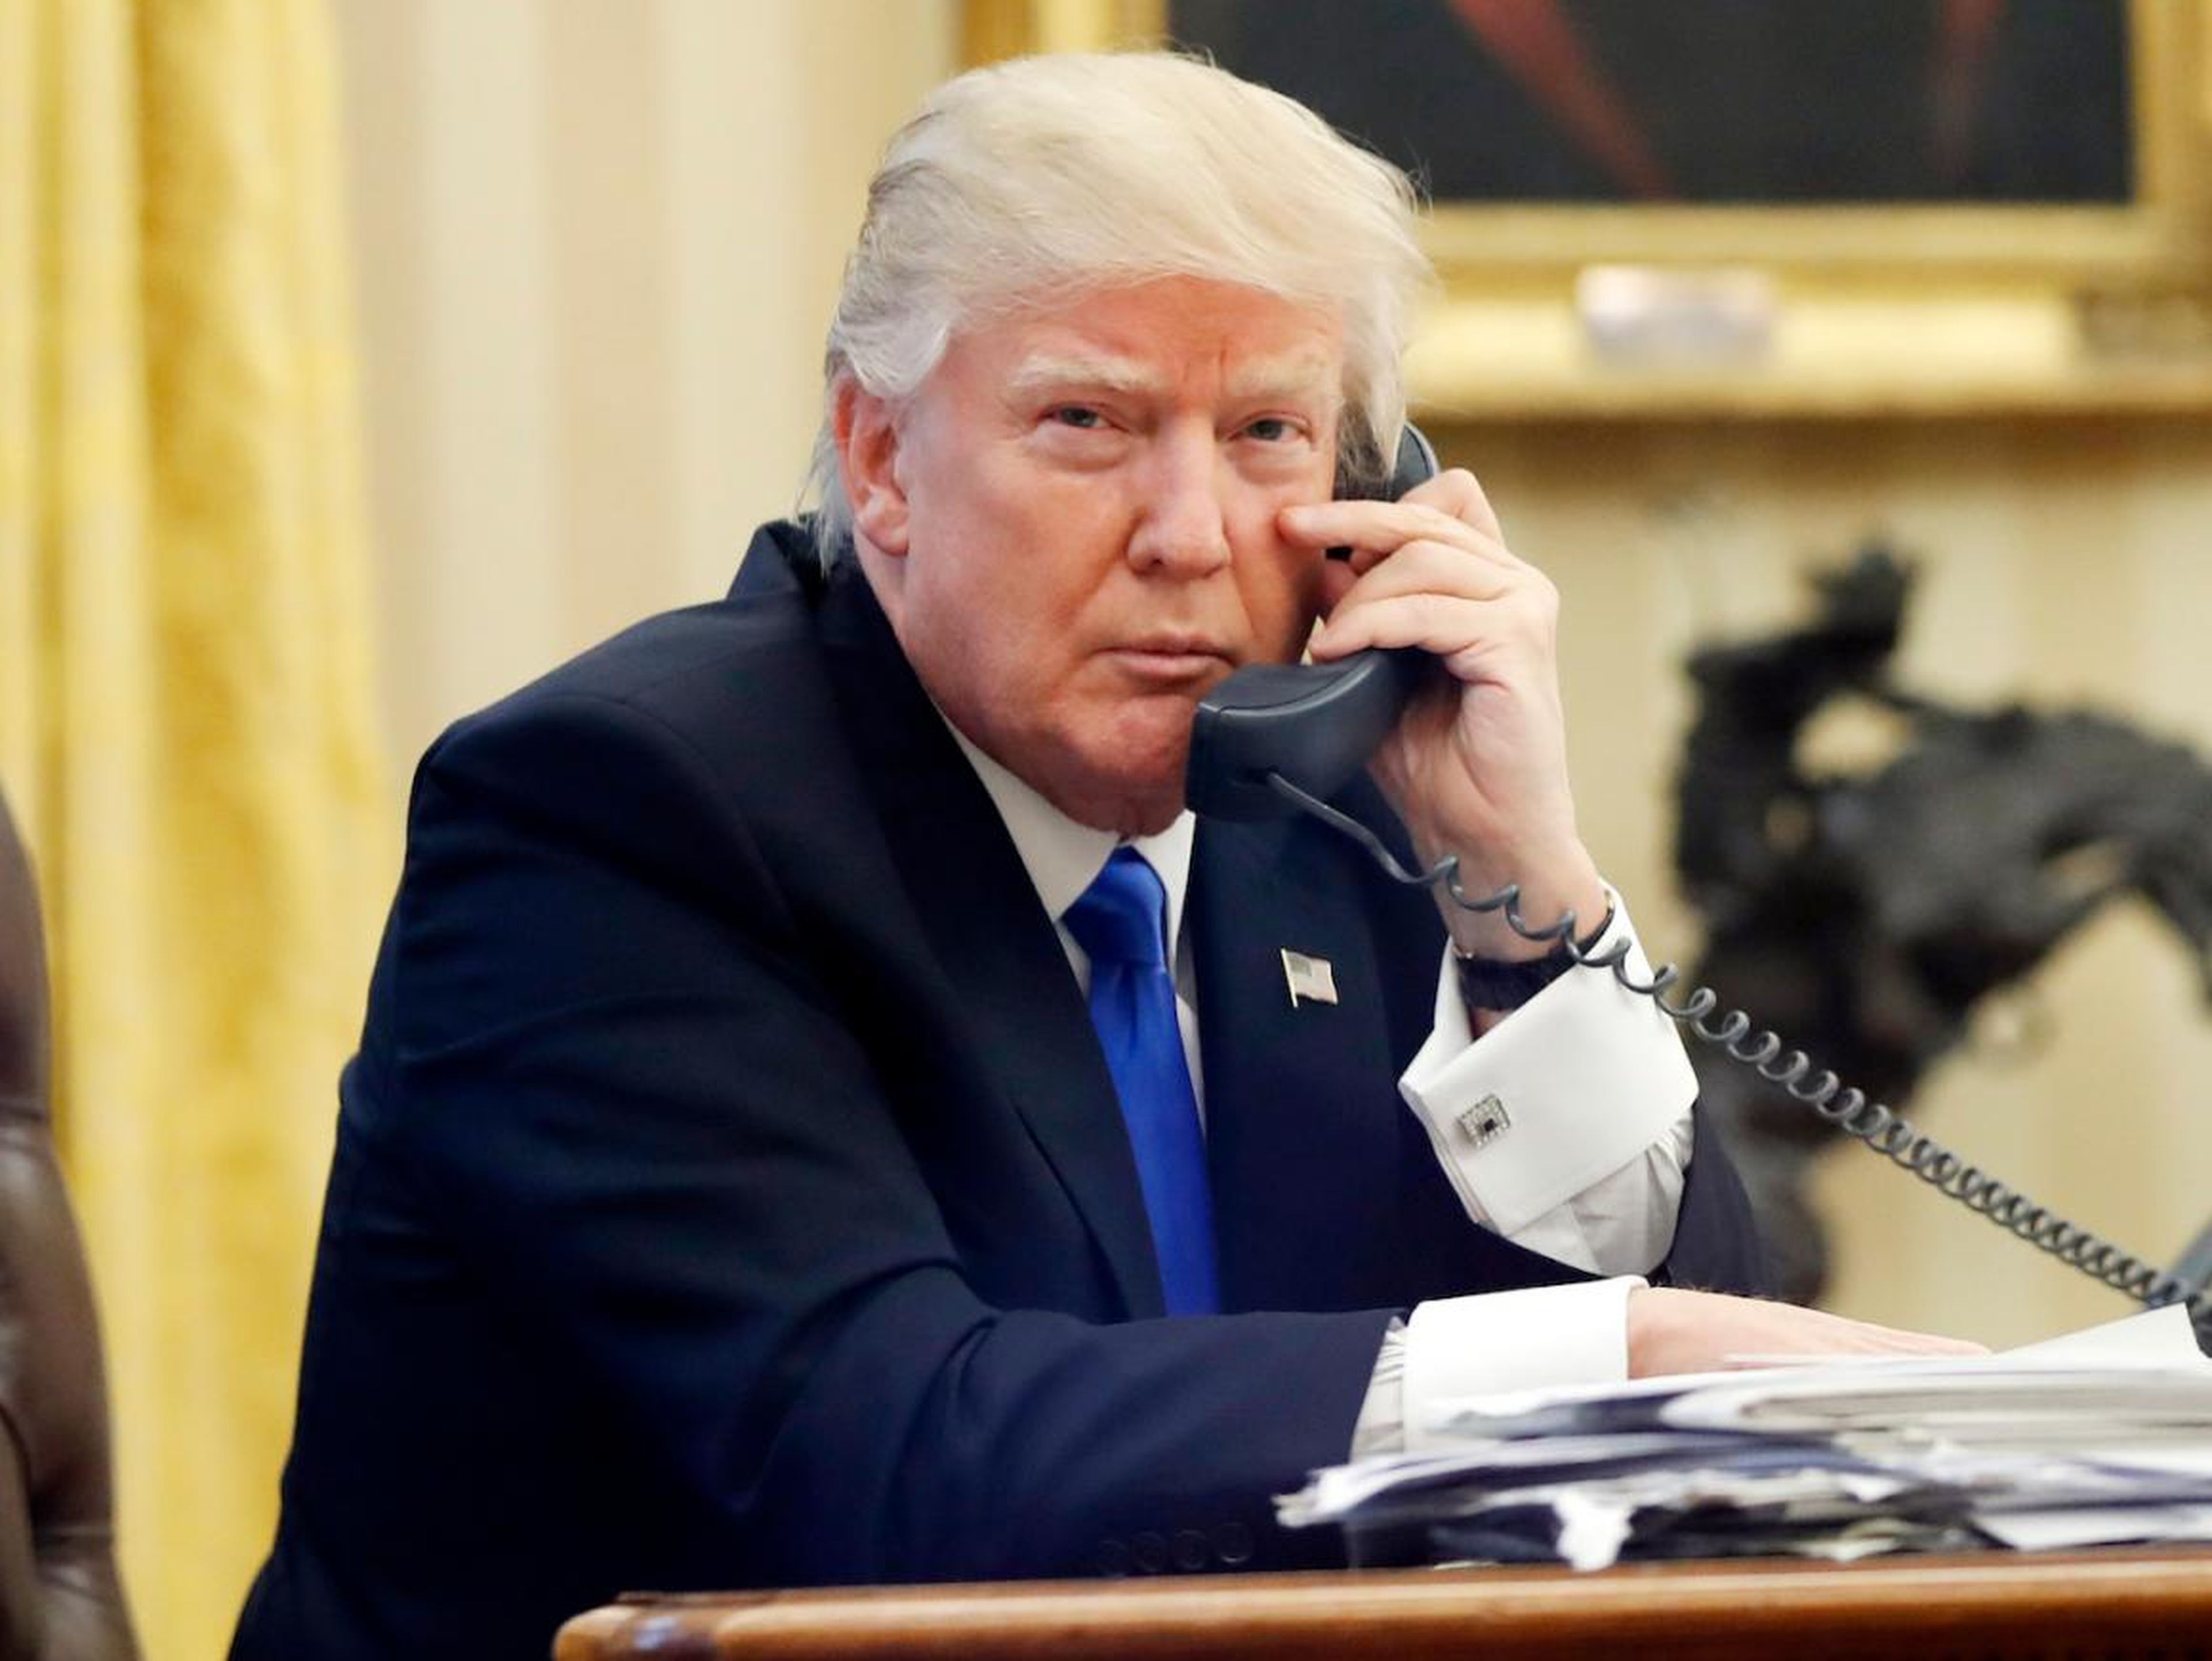 President Donald Trump on the phone in the White House Oval Office in July 2017.